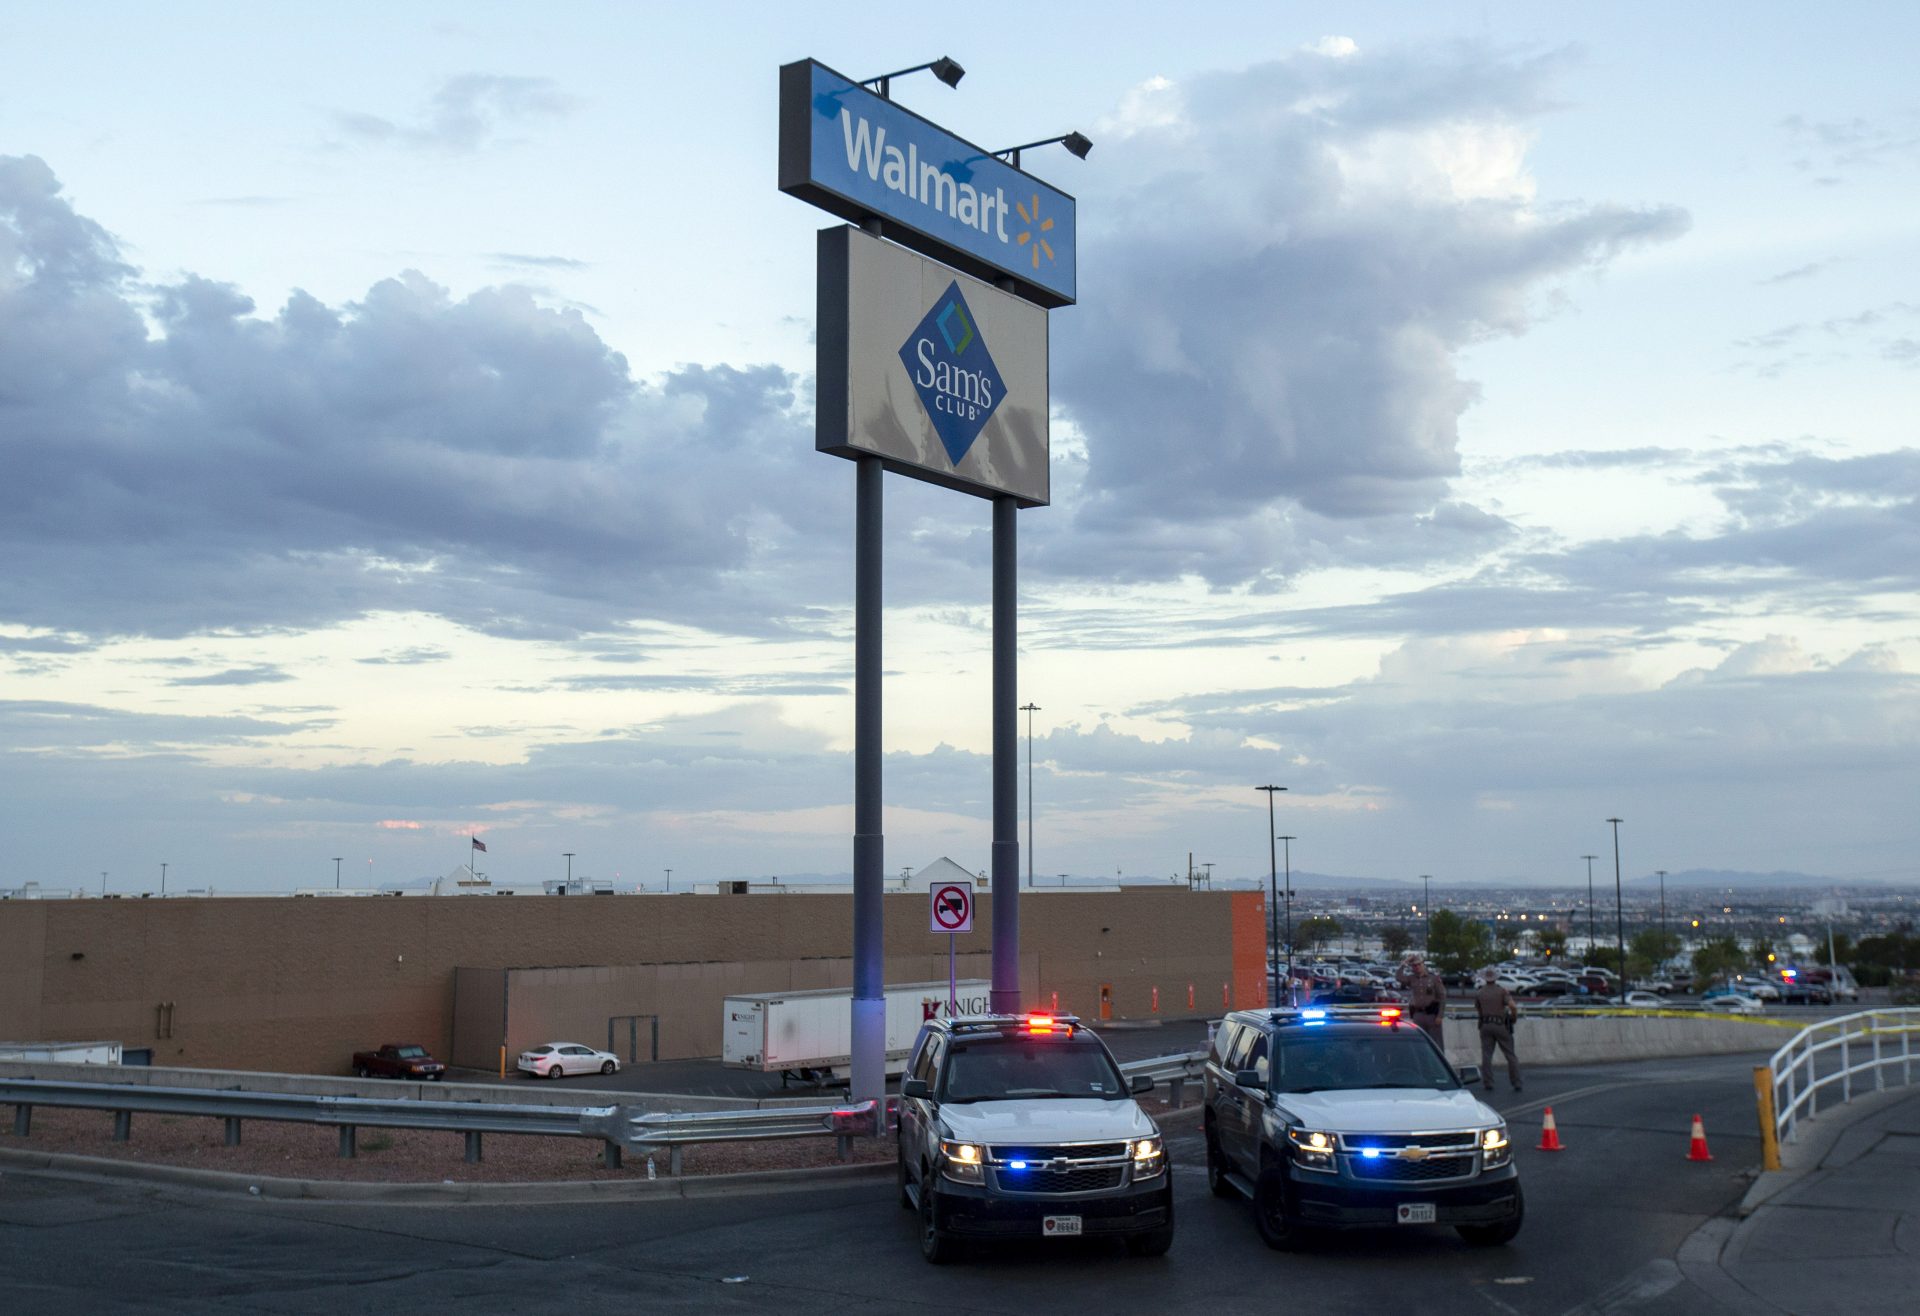 Texas state police cars block the access to the Walmart store in the aftermath of a mass shooting in El Paso, Texas, Saturday, Aug. 3, 2019.